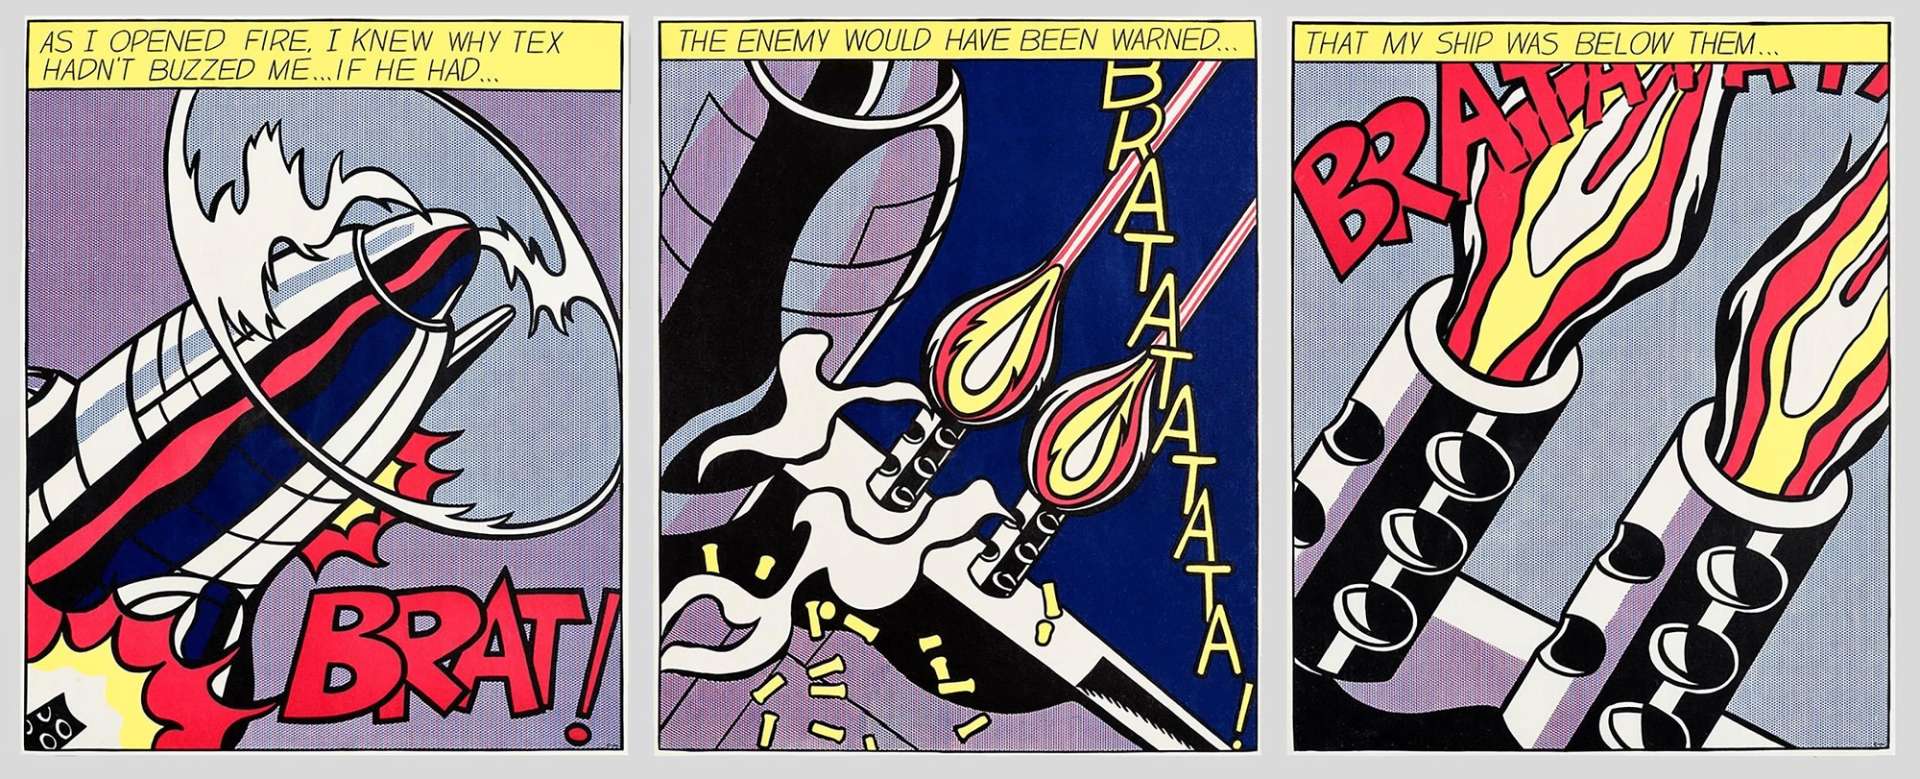 A triptych by Roy Lichtenstein. The first image shows a plane's turbine, with the words "As I opened fire, I knew why Tex hadn't buzzed me... If he had...". The second image shows the plane's weaponry with two flames, and the phrase "the enemy would have been warned...". The final image shows a close-up of the machine guns on the plane, with fire escaping, and the phrase "that my ship was below them...".